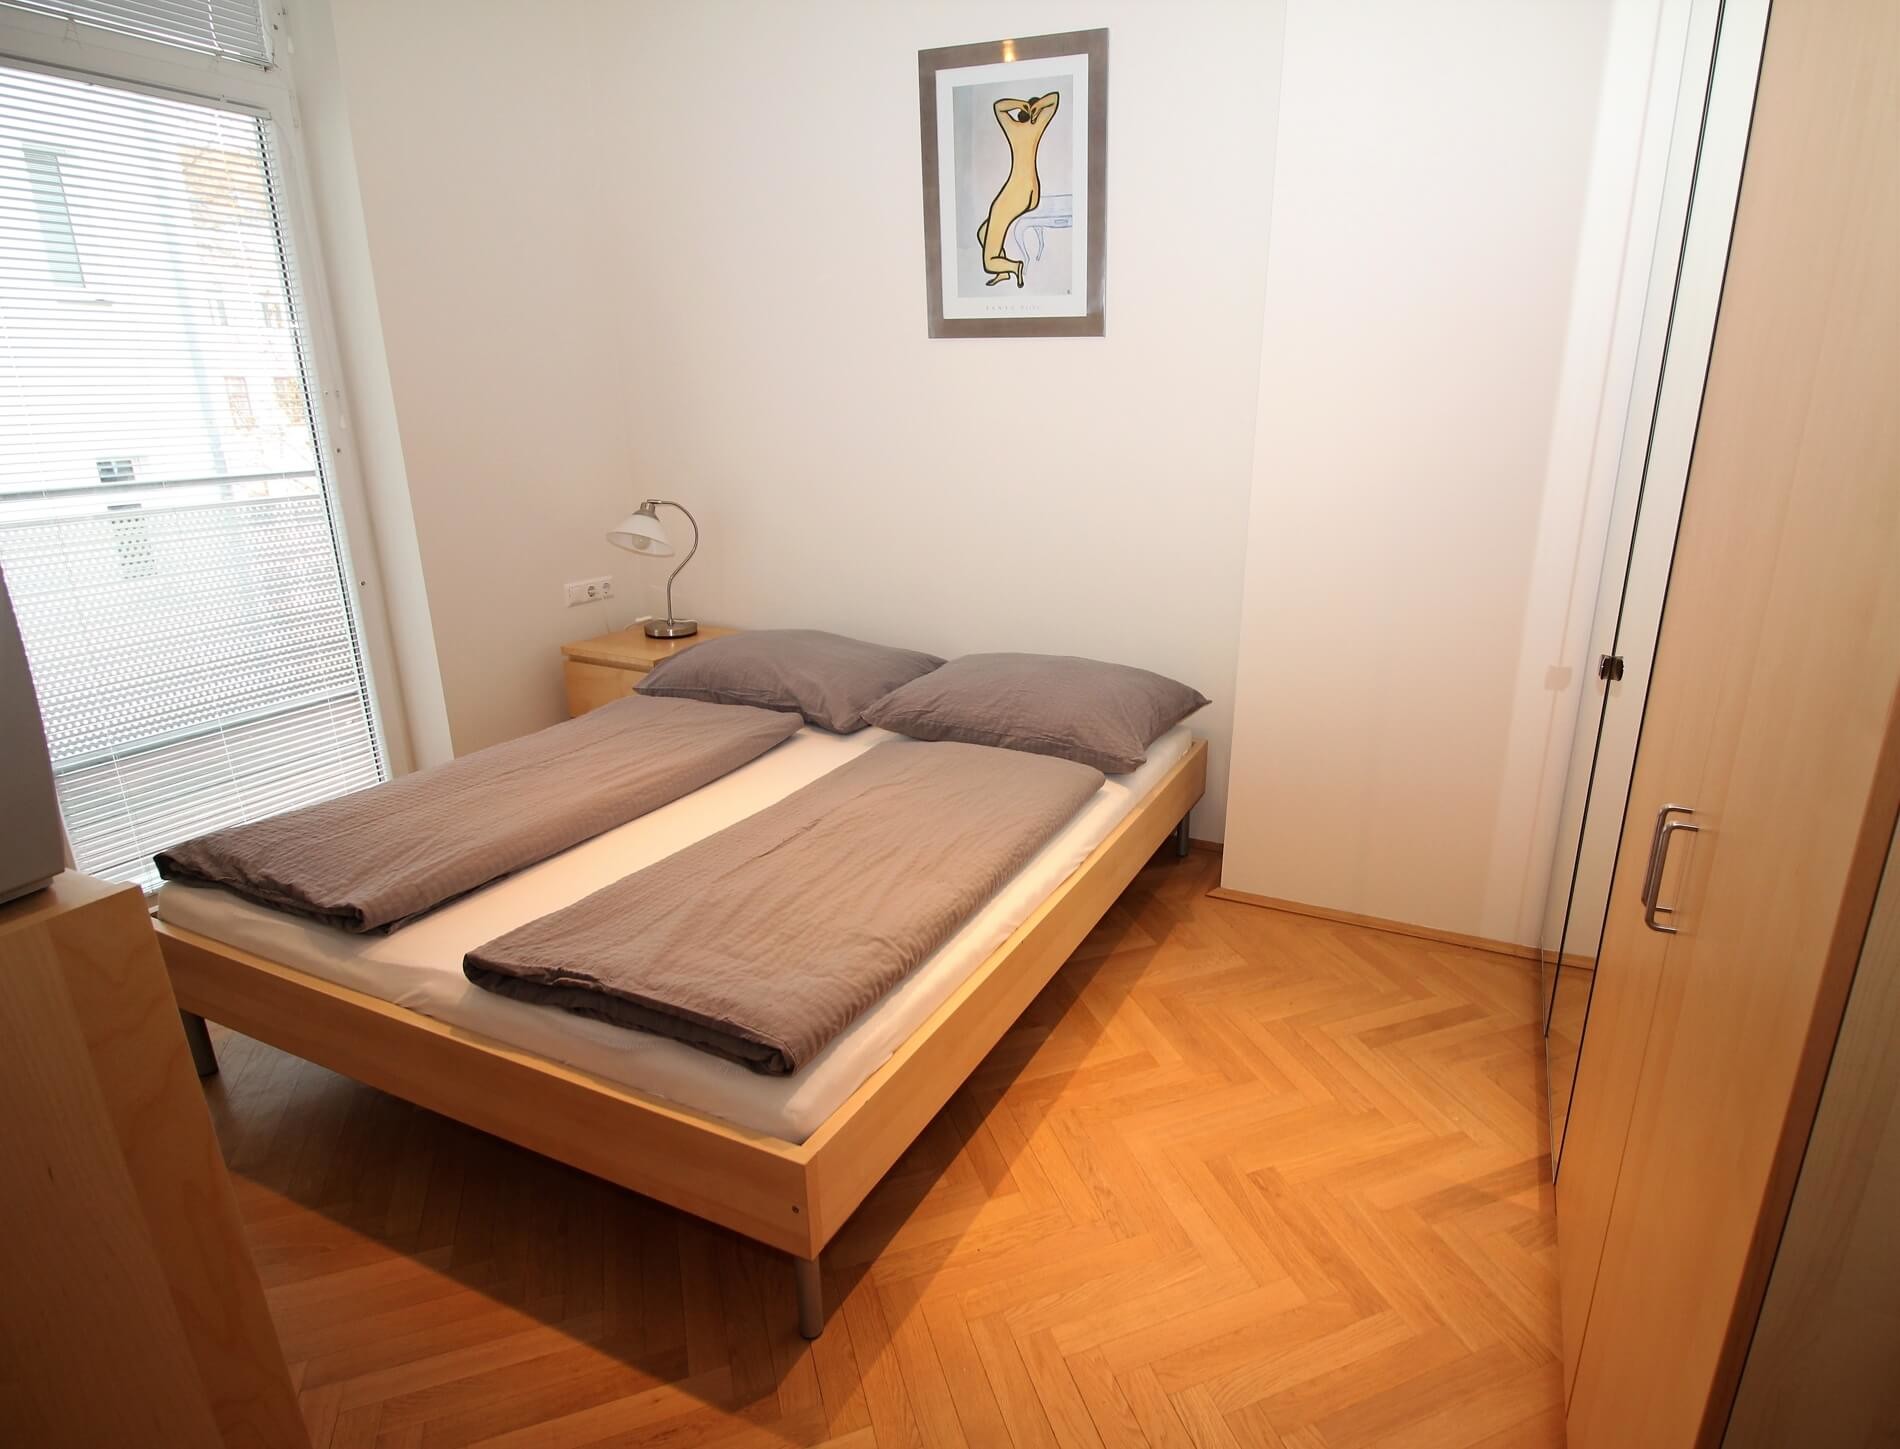 Completely furnished 2-bedroom apartment with Balcony in Vienna (great location) 33